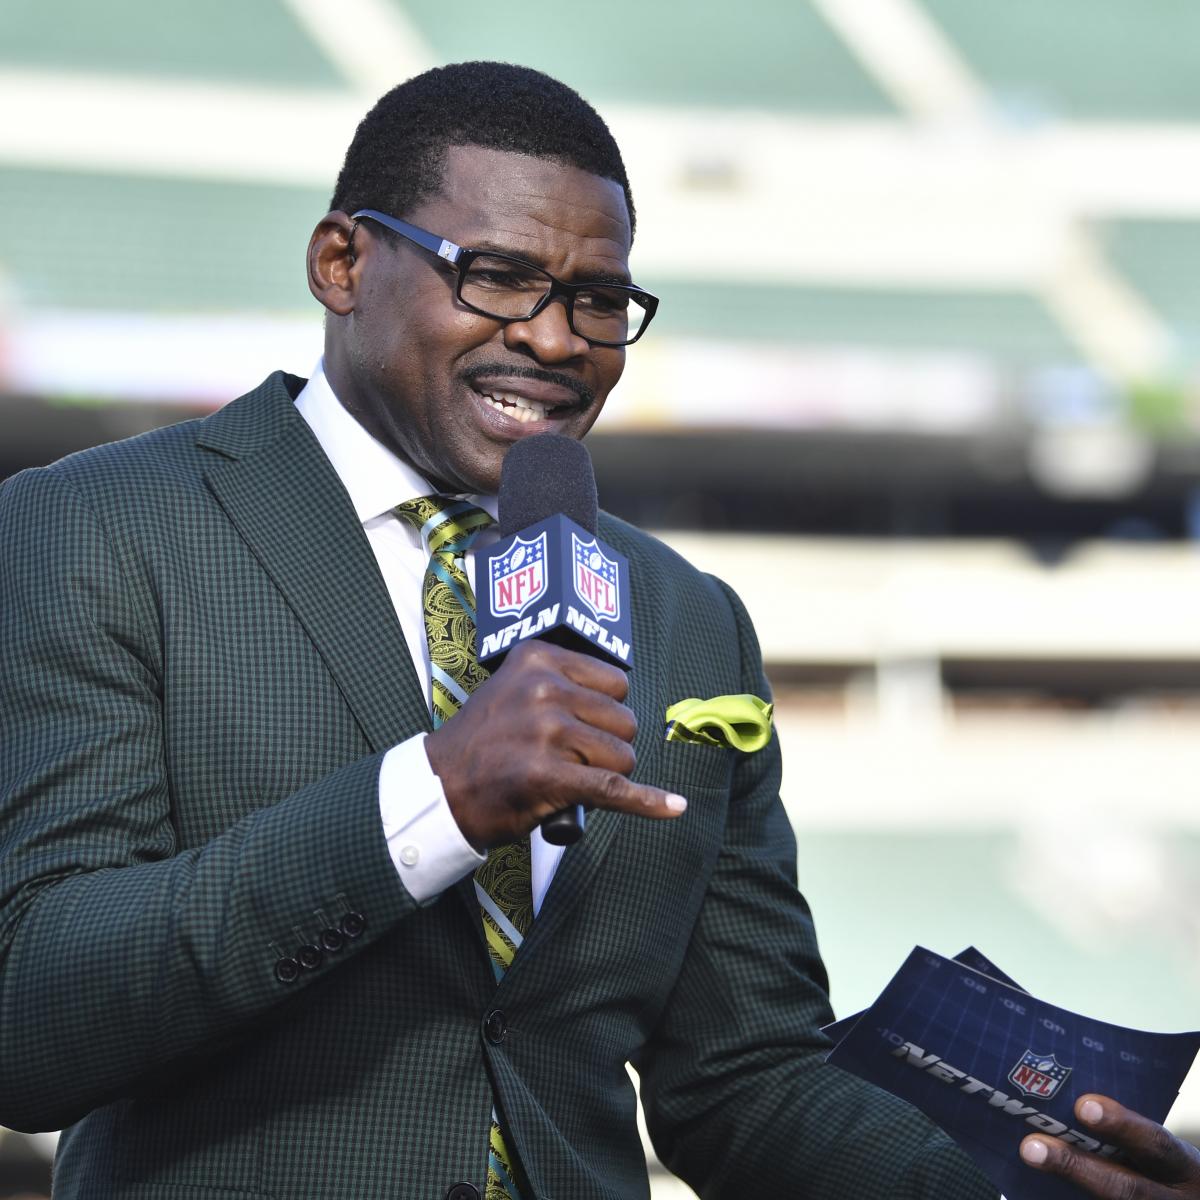 Cowboys Yarn Michael Irvin: I Went By draw of ‘3 Weeks of Hell’ with COVID-19